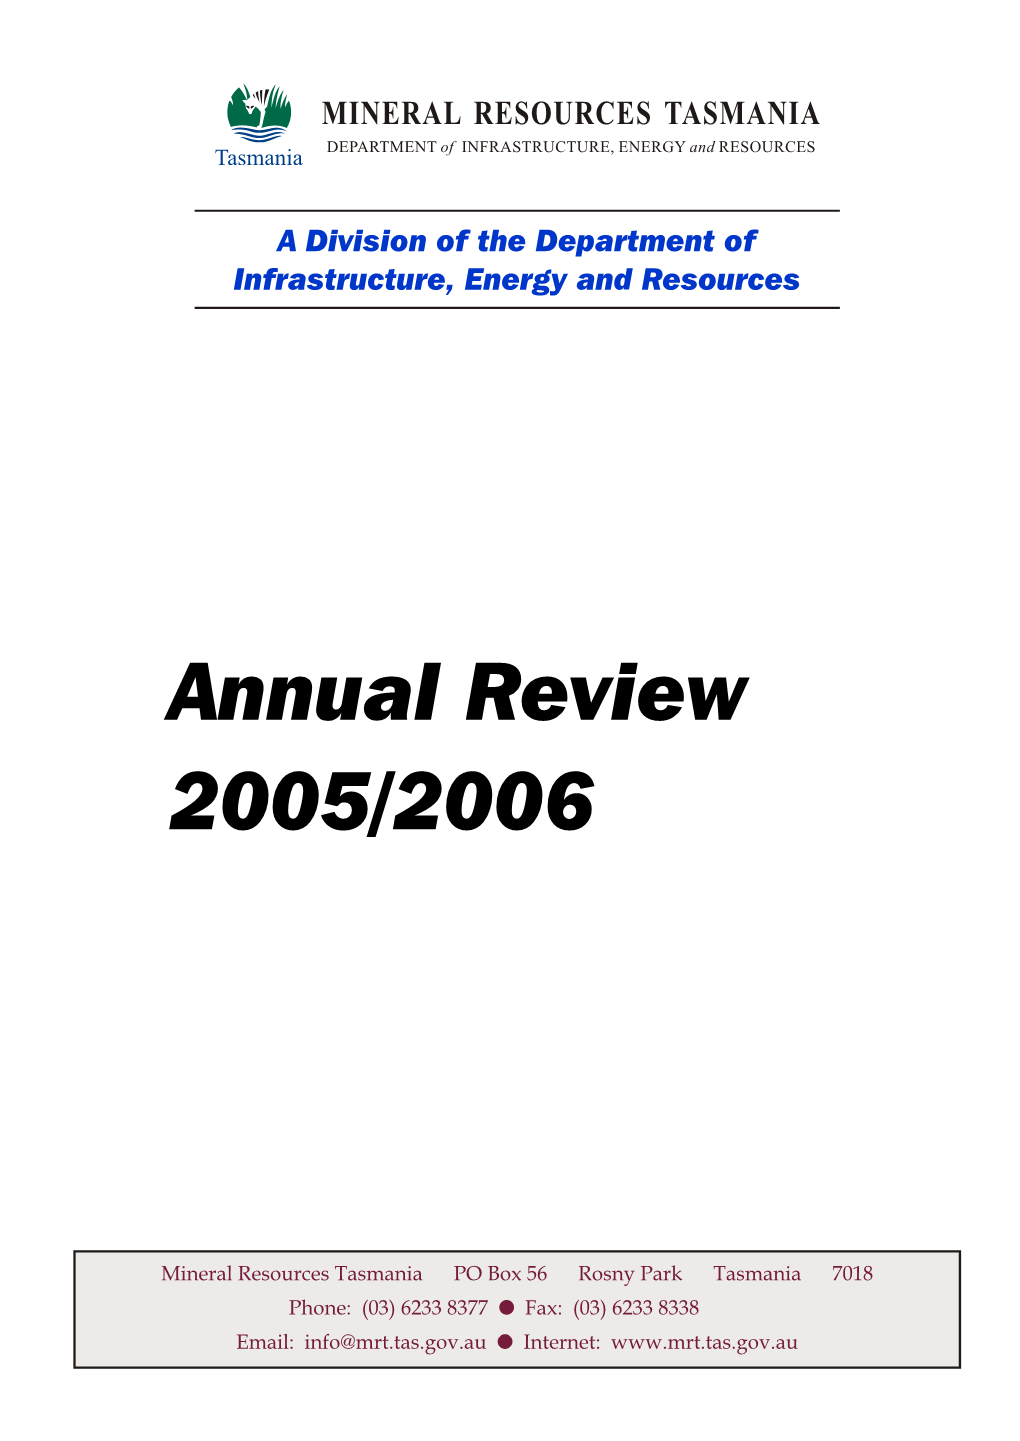 Annual Review 2005/2006